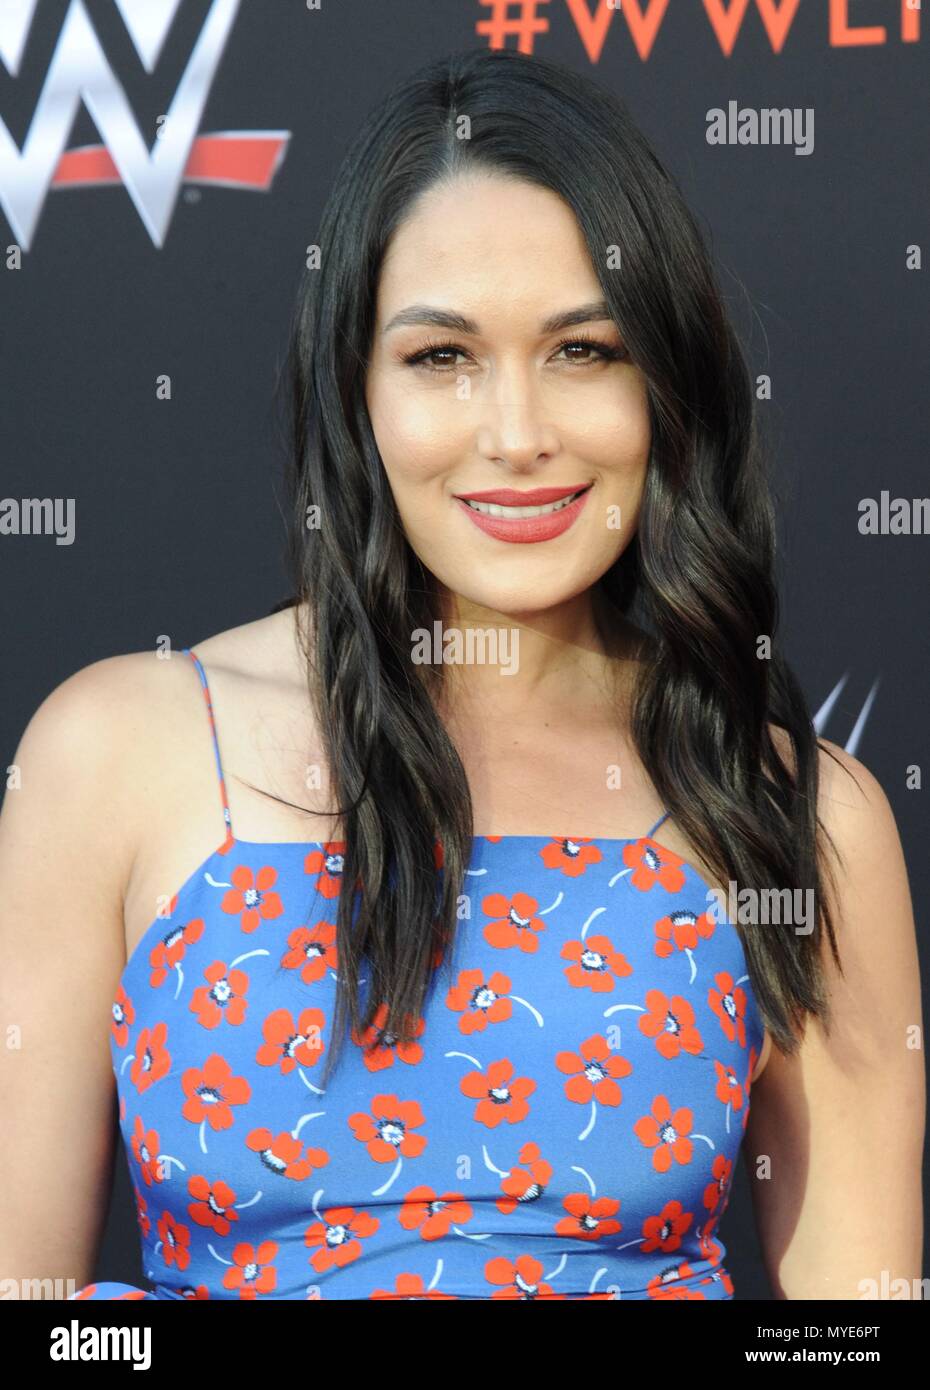 Nikki Bella at arrivals for World Wrestling Entertainment WWE FYC Event, Saban Media Center at the Television Academy, North Hollywood, CA June 6, 2018. Photo By: Dee Cercone/Everett Collection Stock Photo